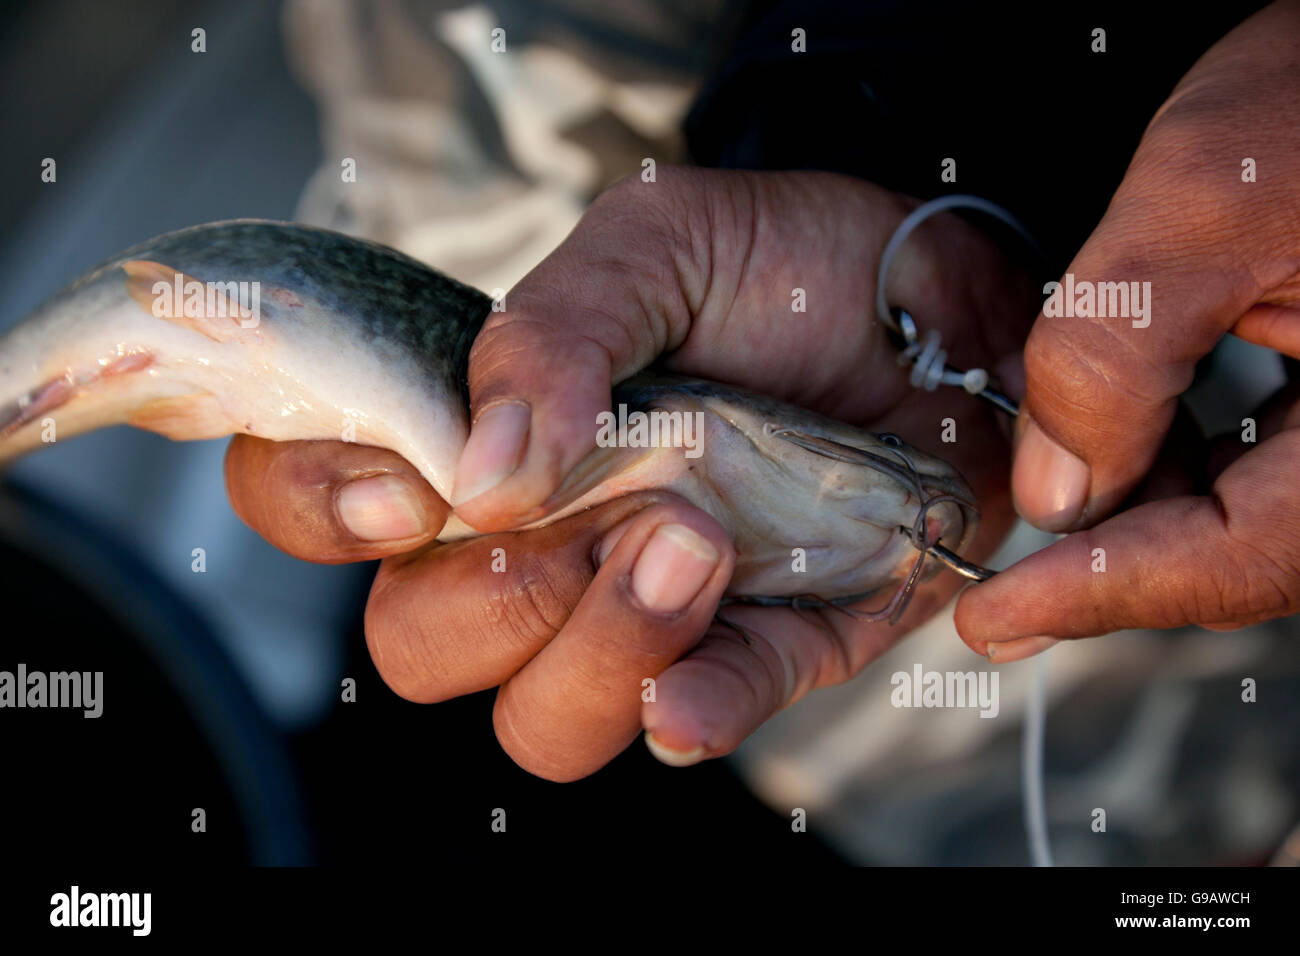 A fisherman attaches a hook to a catfish to be used as bait during fishing in Thailand. Stock Photo